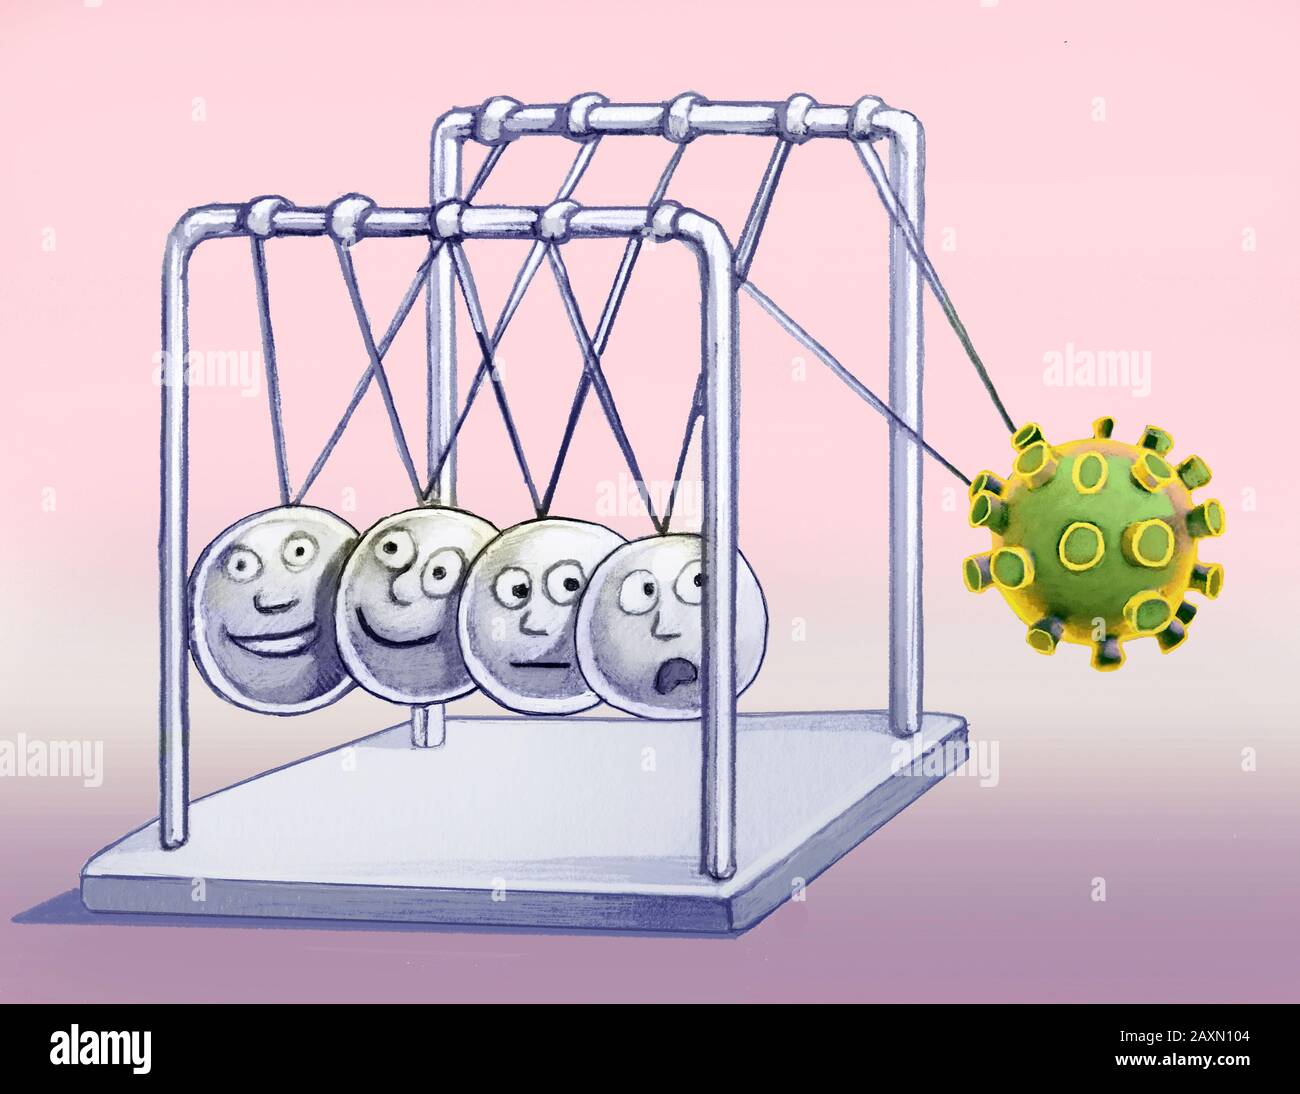 virus infection rapresented by a humor illustration bacterical intruders causing sickness and disease to humanity Stock Photo